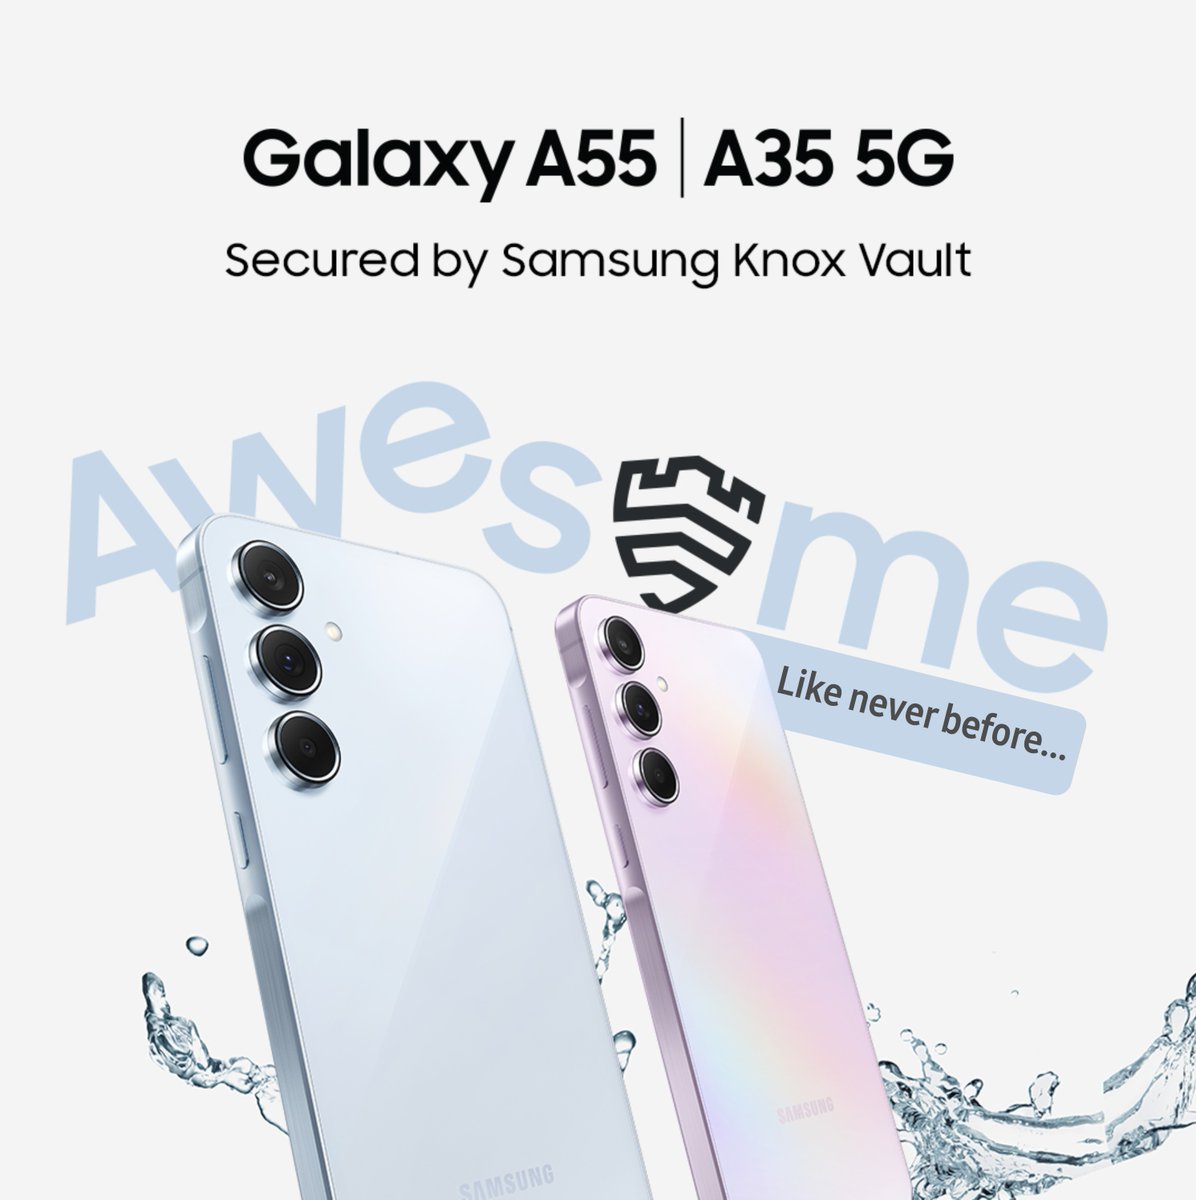 The iconic #GalaxyA35 and #GalaxyA55 5G designs feature a linear camera layout encased in an elegant glass back and a flat side frame for a sleek look and feel.

Eenjoy your #AwesomeLikeNeverBefore when you snap, record, and play games at the best performance.

#SamsungNigeria